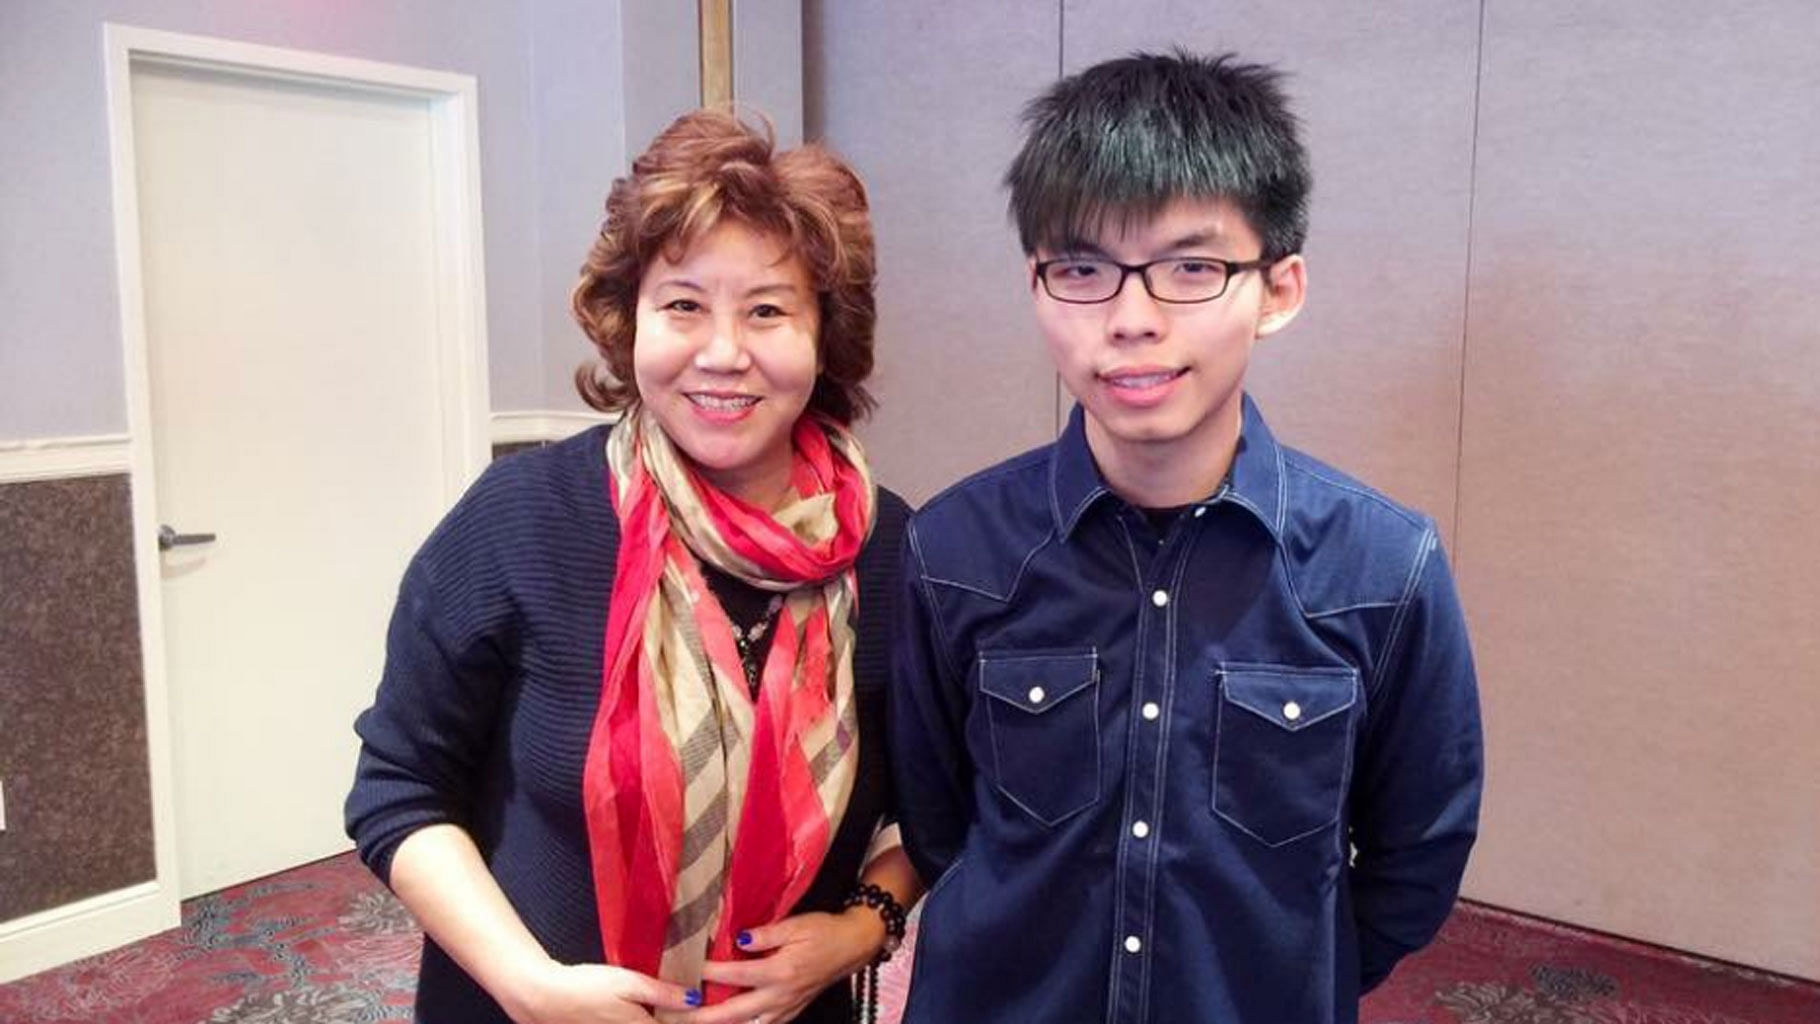 Lu Jinghua, a well-known Chinese activist with Joshua Wong, who led pro-democracy protests in Hong Kong recently. (Photo Courtesy: <a href="https://twitter.com/Lujinghua">Twitter/Lujinghua</a>)